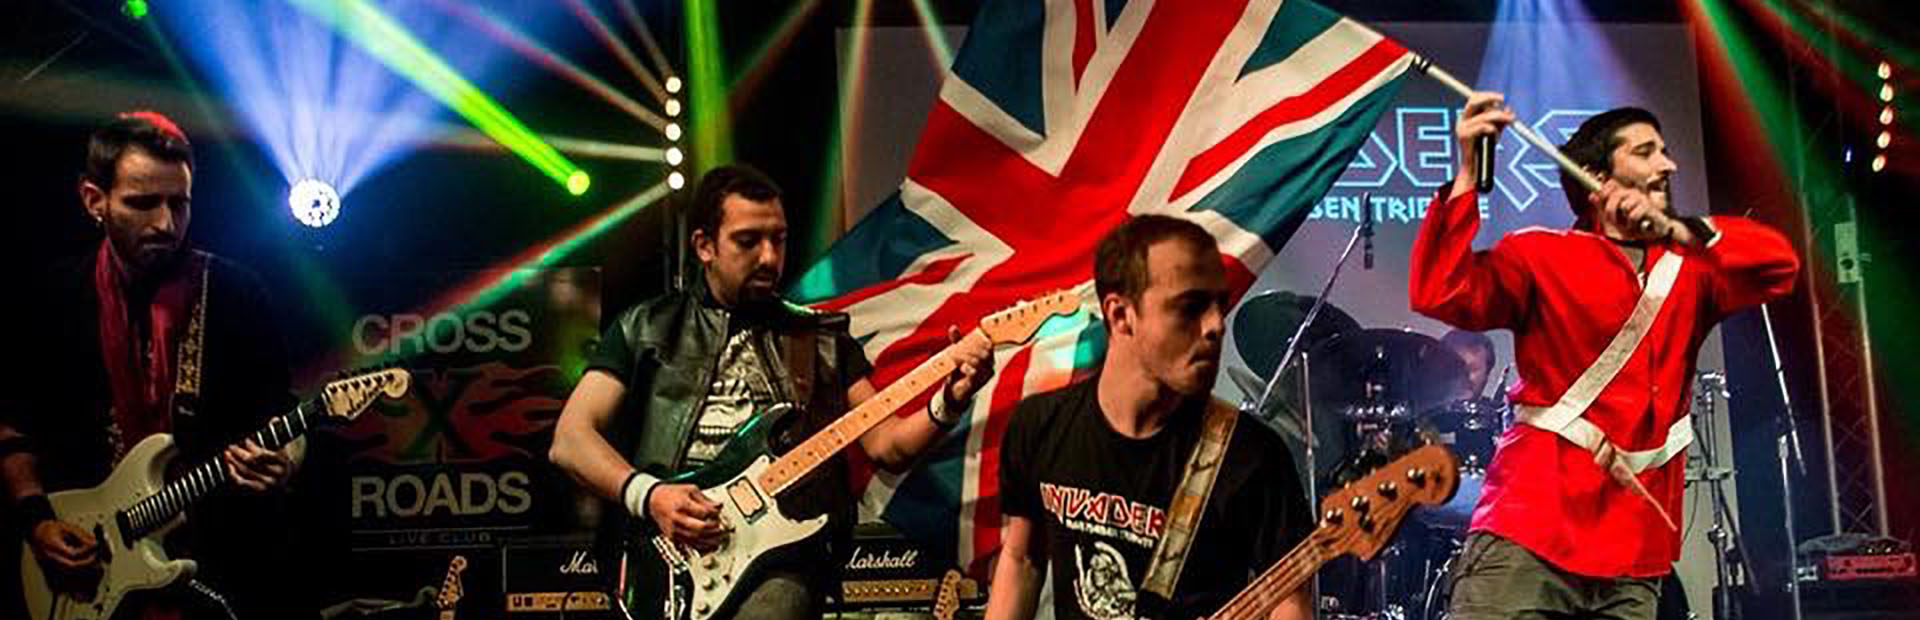 INVADERS - Iron Maiden Tribute